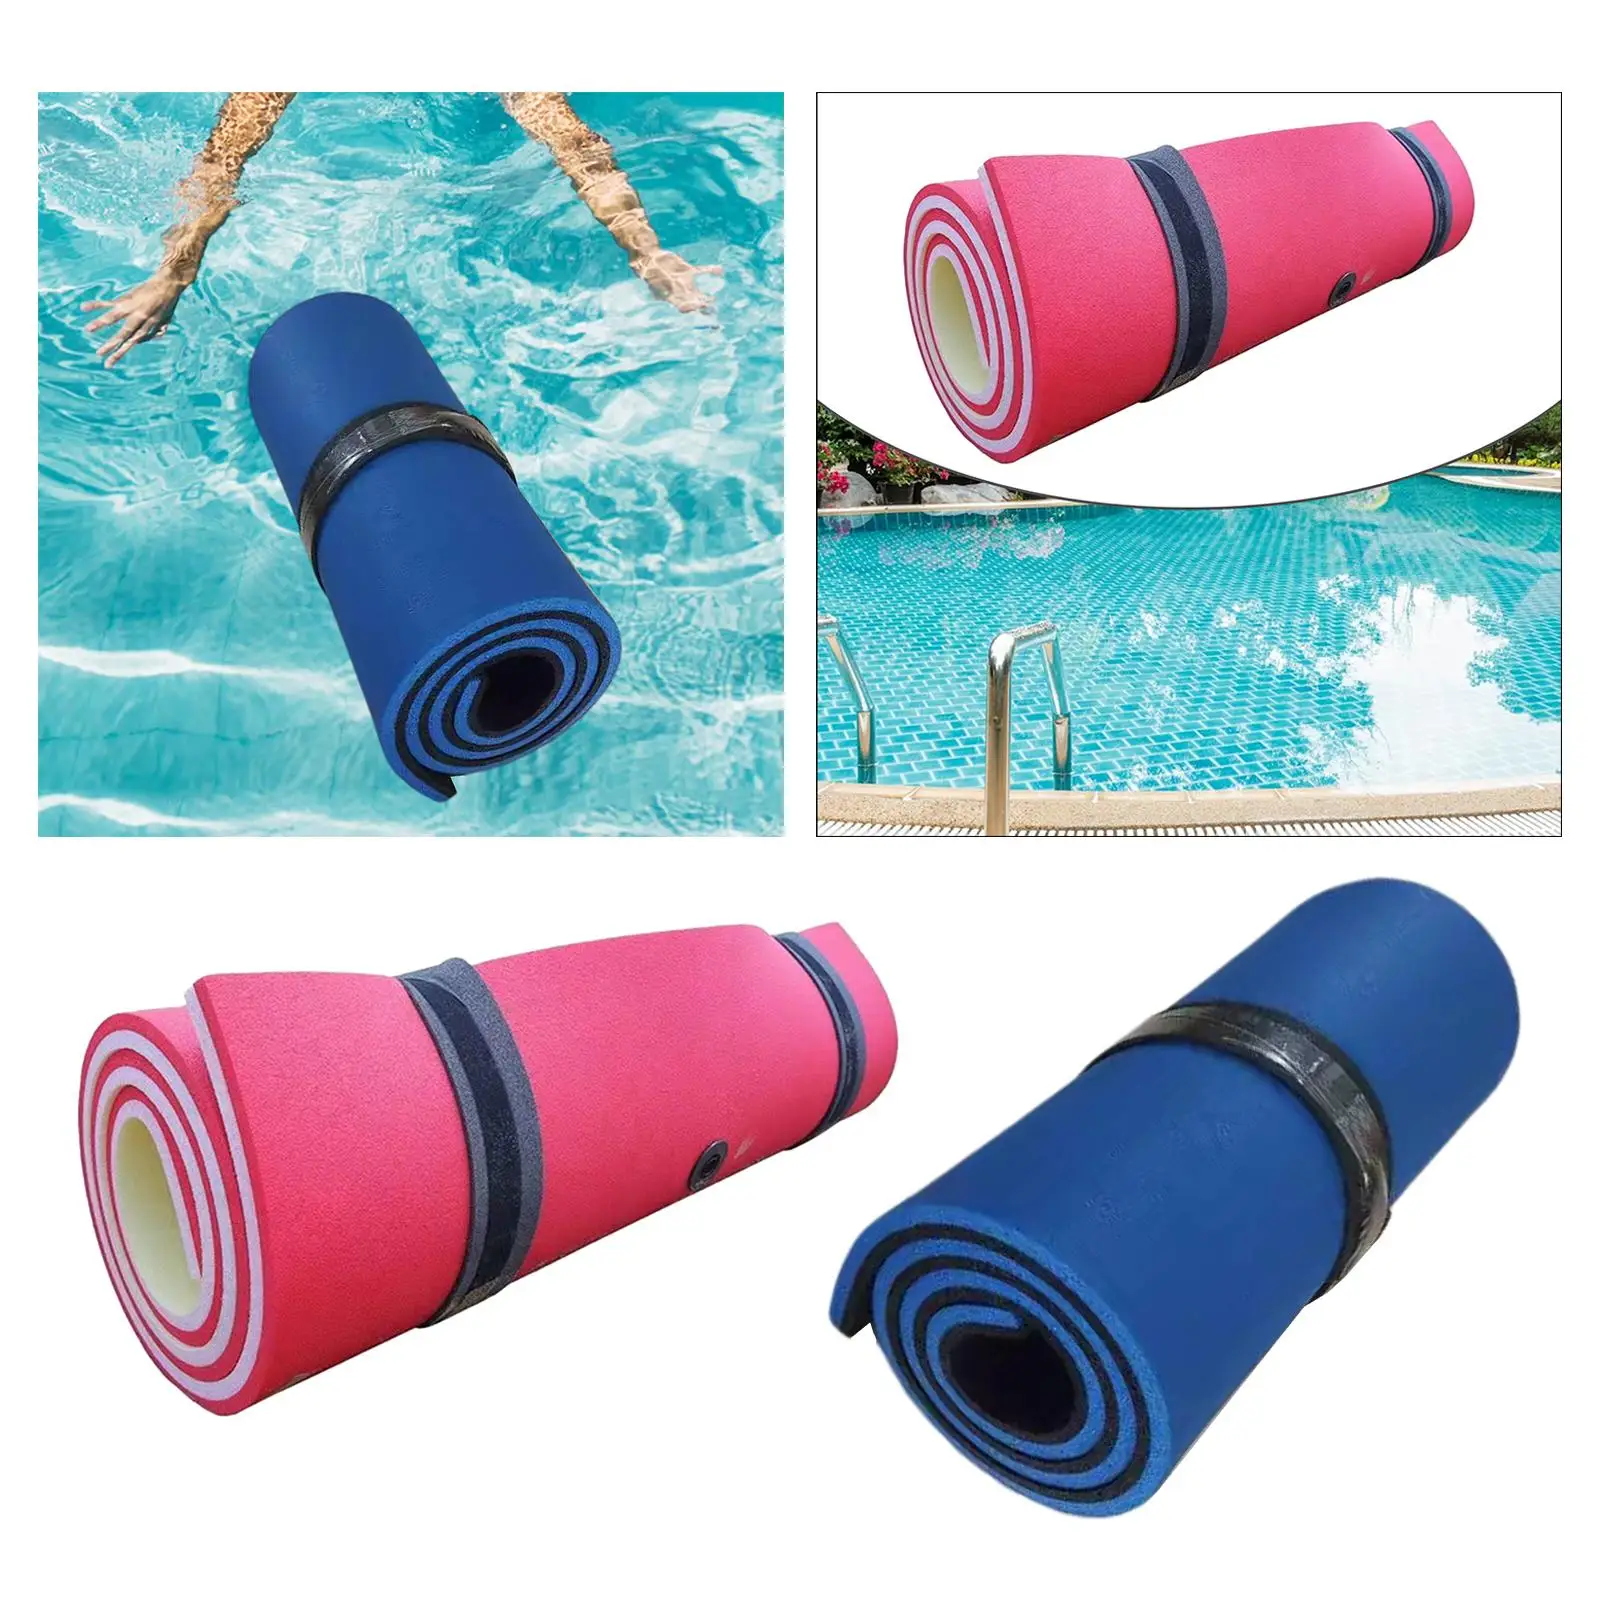 Water Floating Mat Fun Portable Float Mat Bed for Party Outdoor